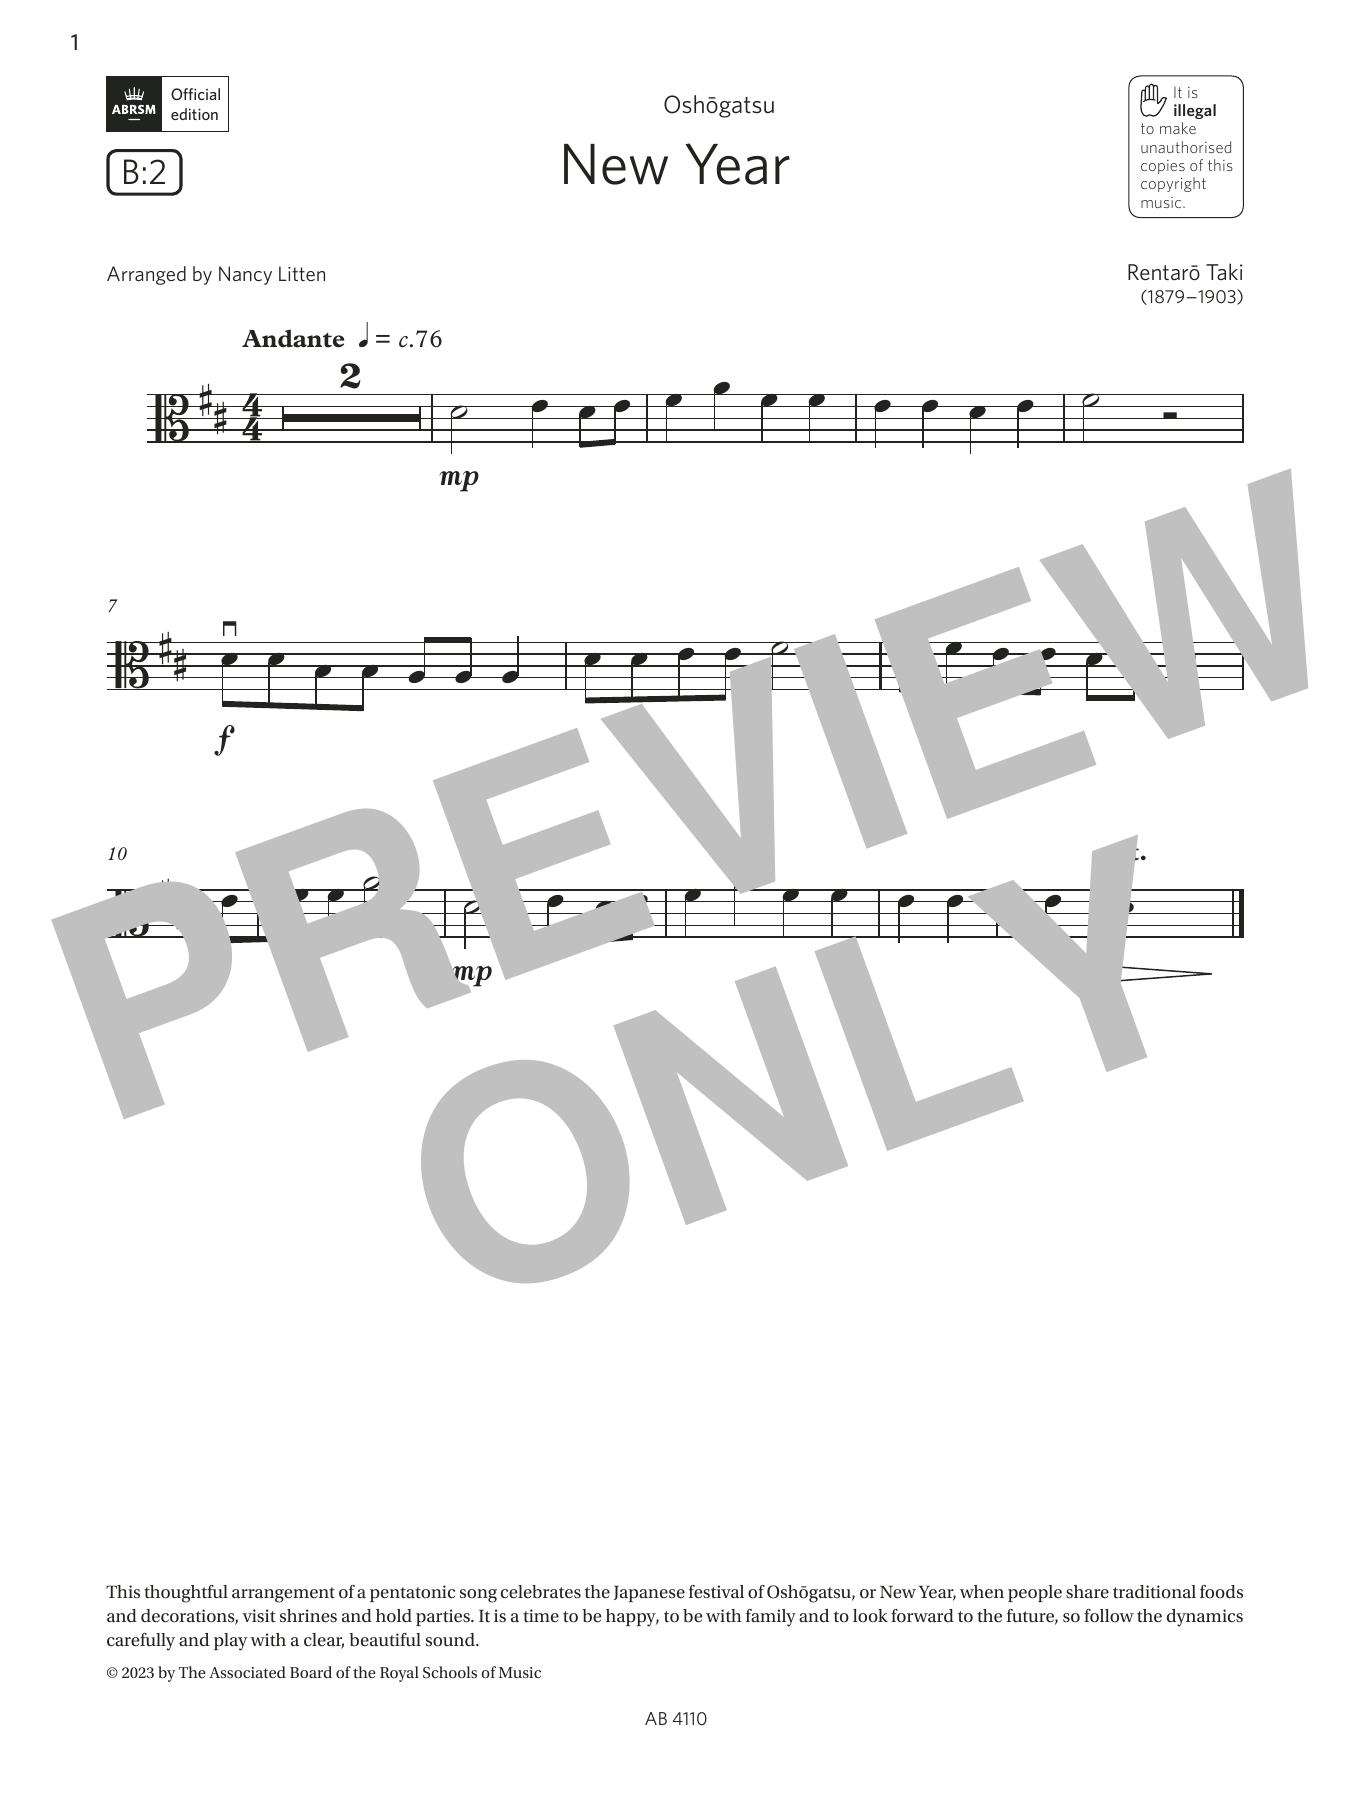 Download Rentaro Taki New Year (Grade Initial, B2, from the A Sheet Music